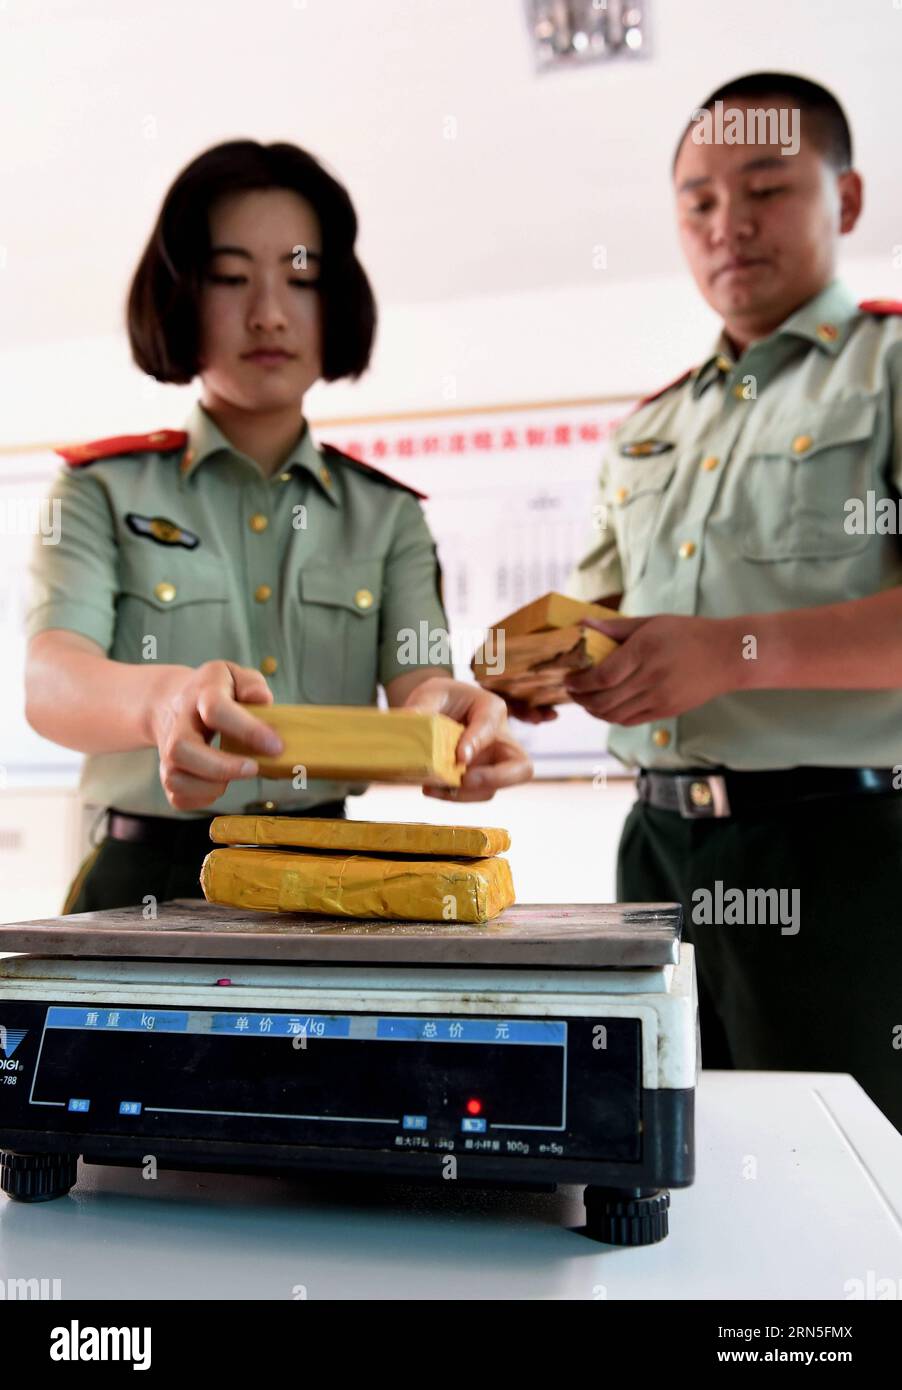 DEHONG, June 24, 2015 -- Zhang Liu (L) and her comrade prepare to weigh drugs they captured at border checkpoint of Mukang in Dehong Dai-Jingpo Autonomous Prefecture, southwest China s Yunnan Province, June 24, 2015. Born in 1995, Zhang Liu became an anti-drug soldier in border checkpoint of Mukang in 2013. Grown up in an affluent family in central China s Hunan Province, Zhang said that being a soldier had always been her dream, which drove her to join the army after graduating from high school. Being a front line anti-drug force, the border checkpoint of Mukang has captured about 100 kilogra Stock Photo